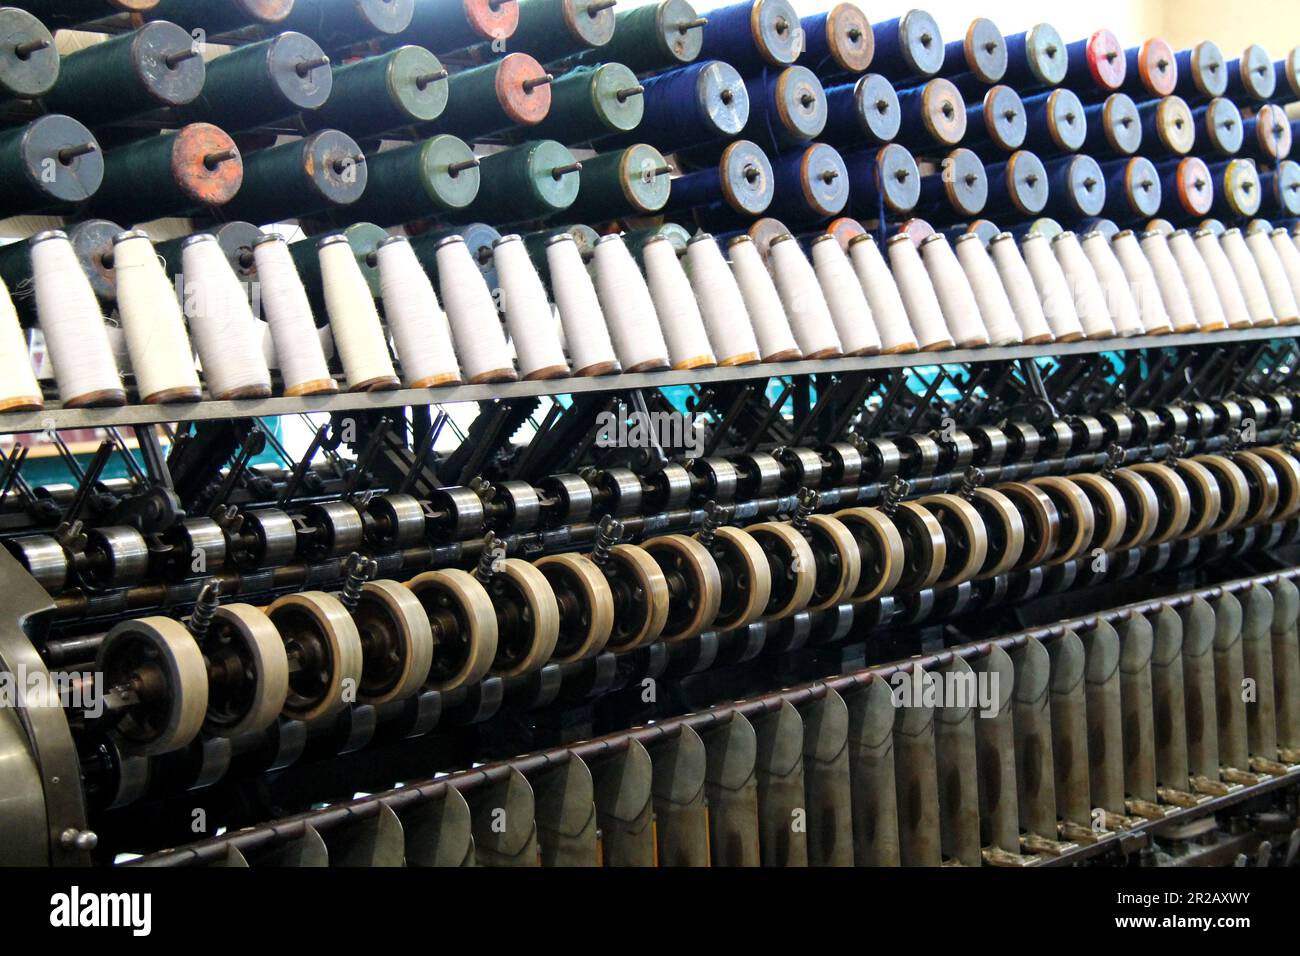 Green Spindle Weaving Machine Used To Make Cloth Stock Photo - Image of  garment, culture: 154004772